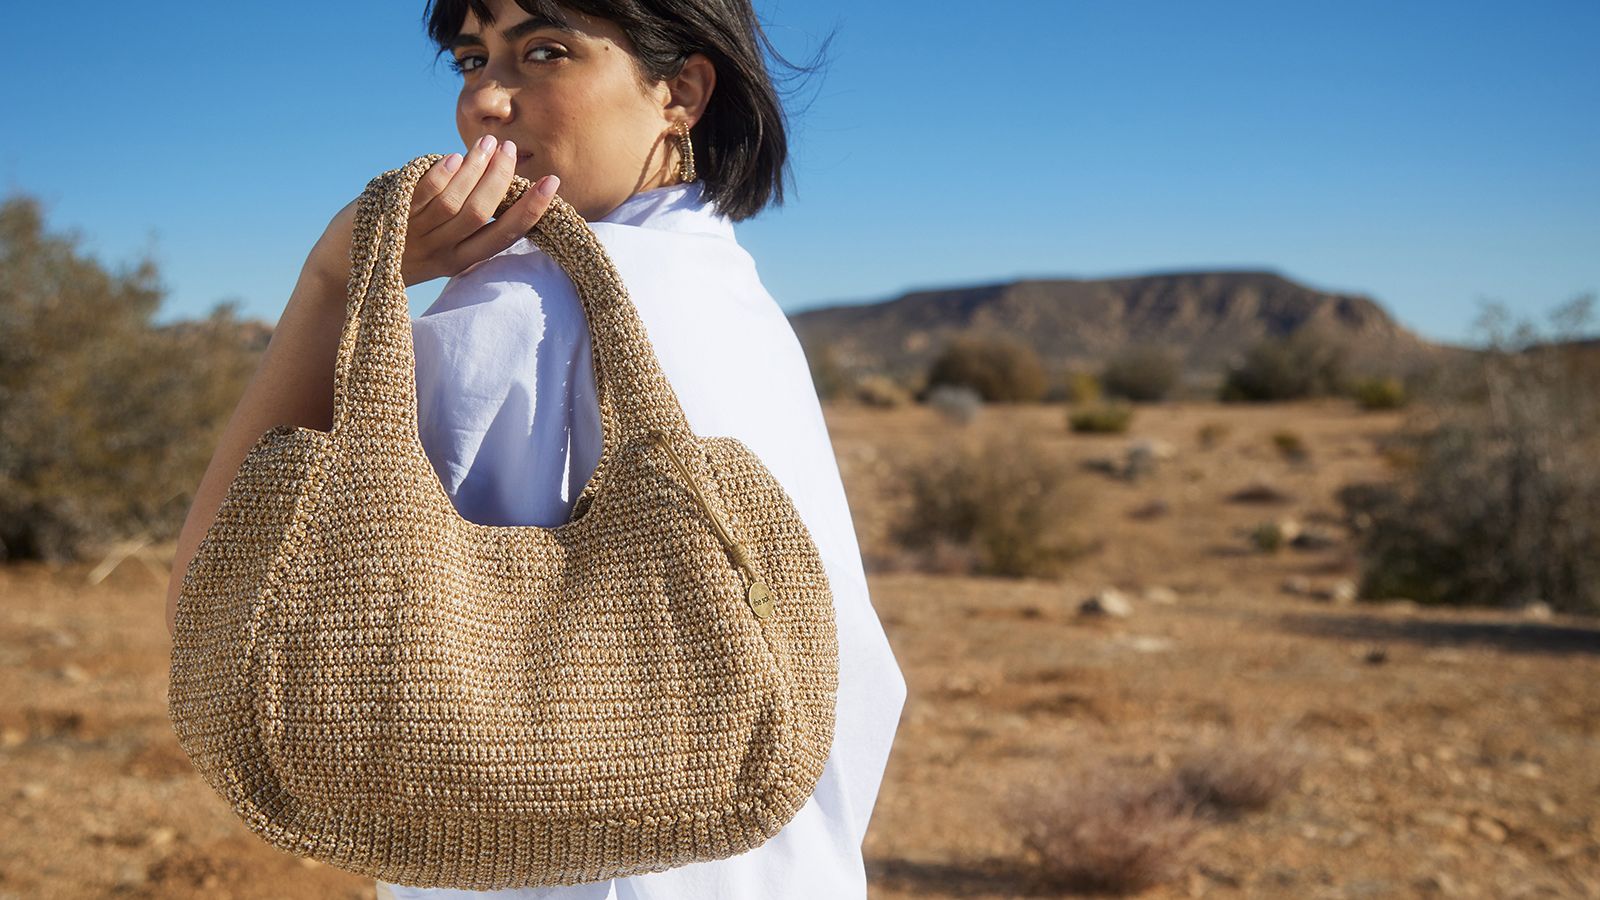 The Sak brings eco-conscious bags to your spring wardrobe | CNN Underscored